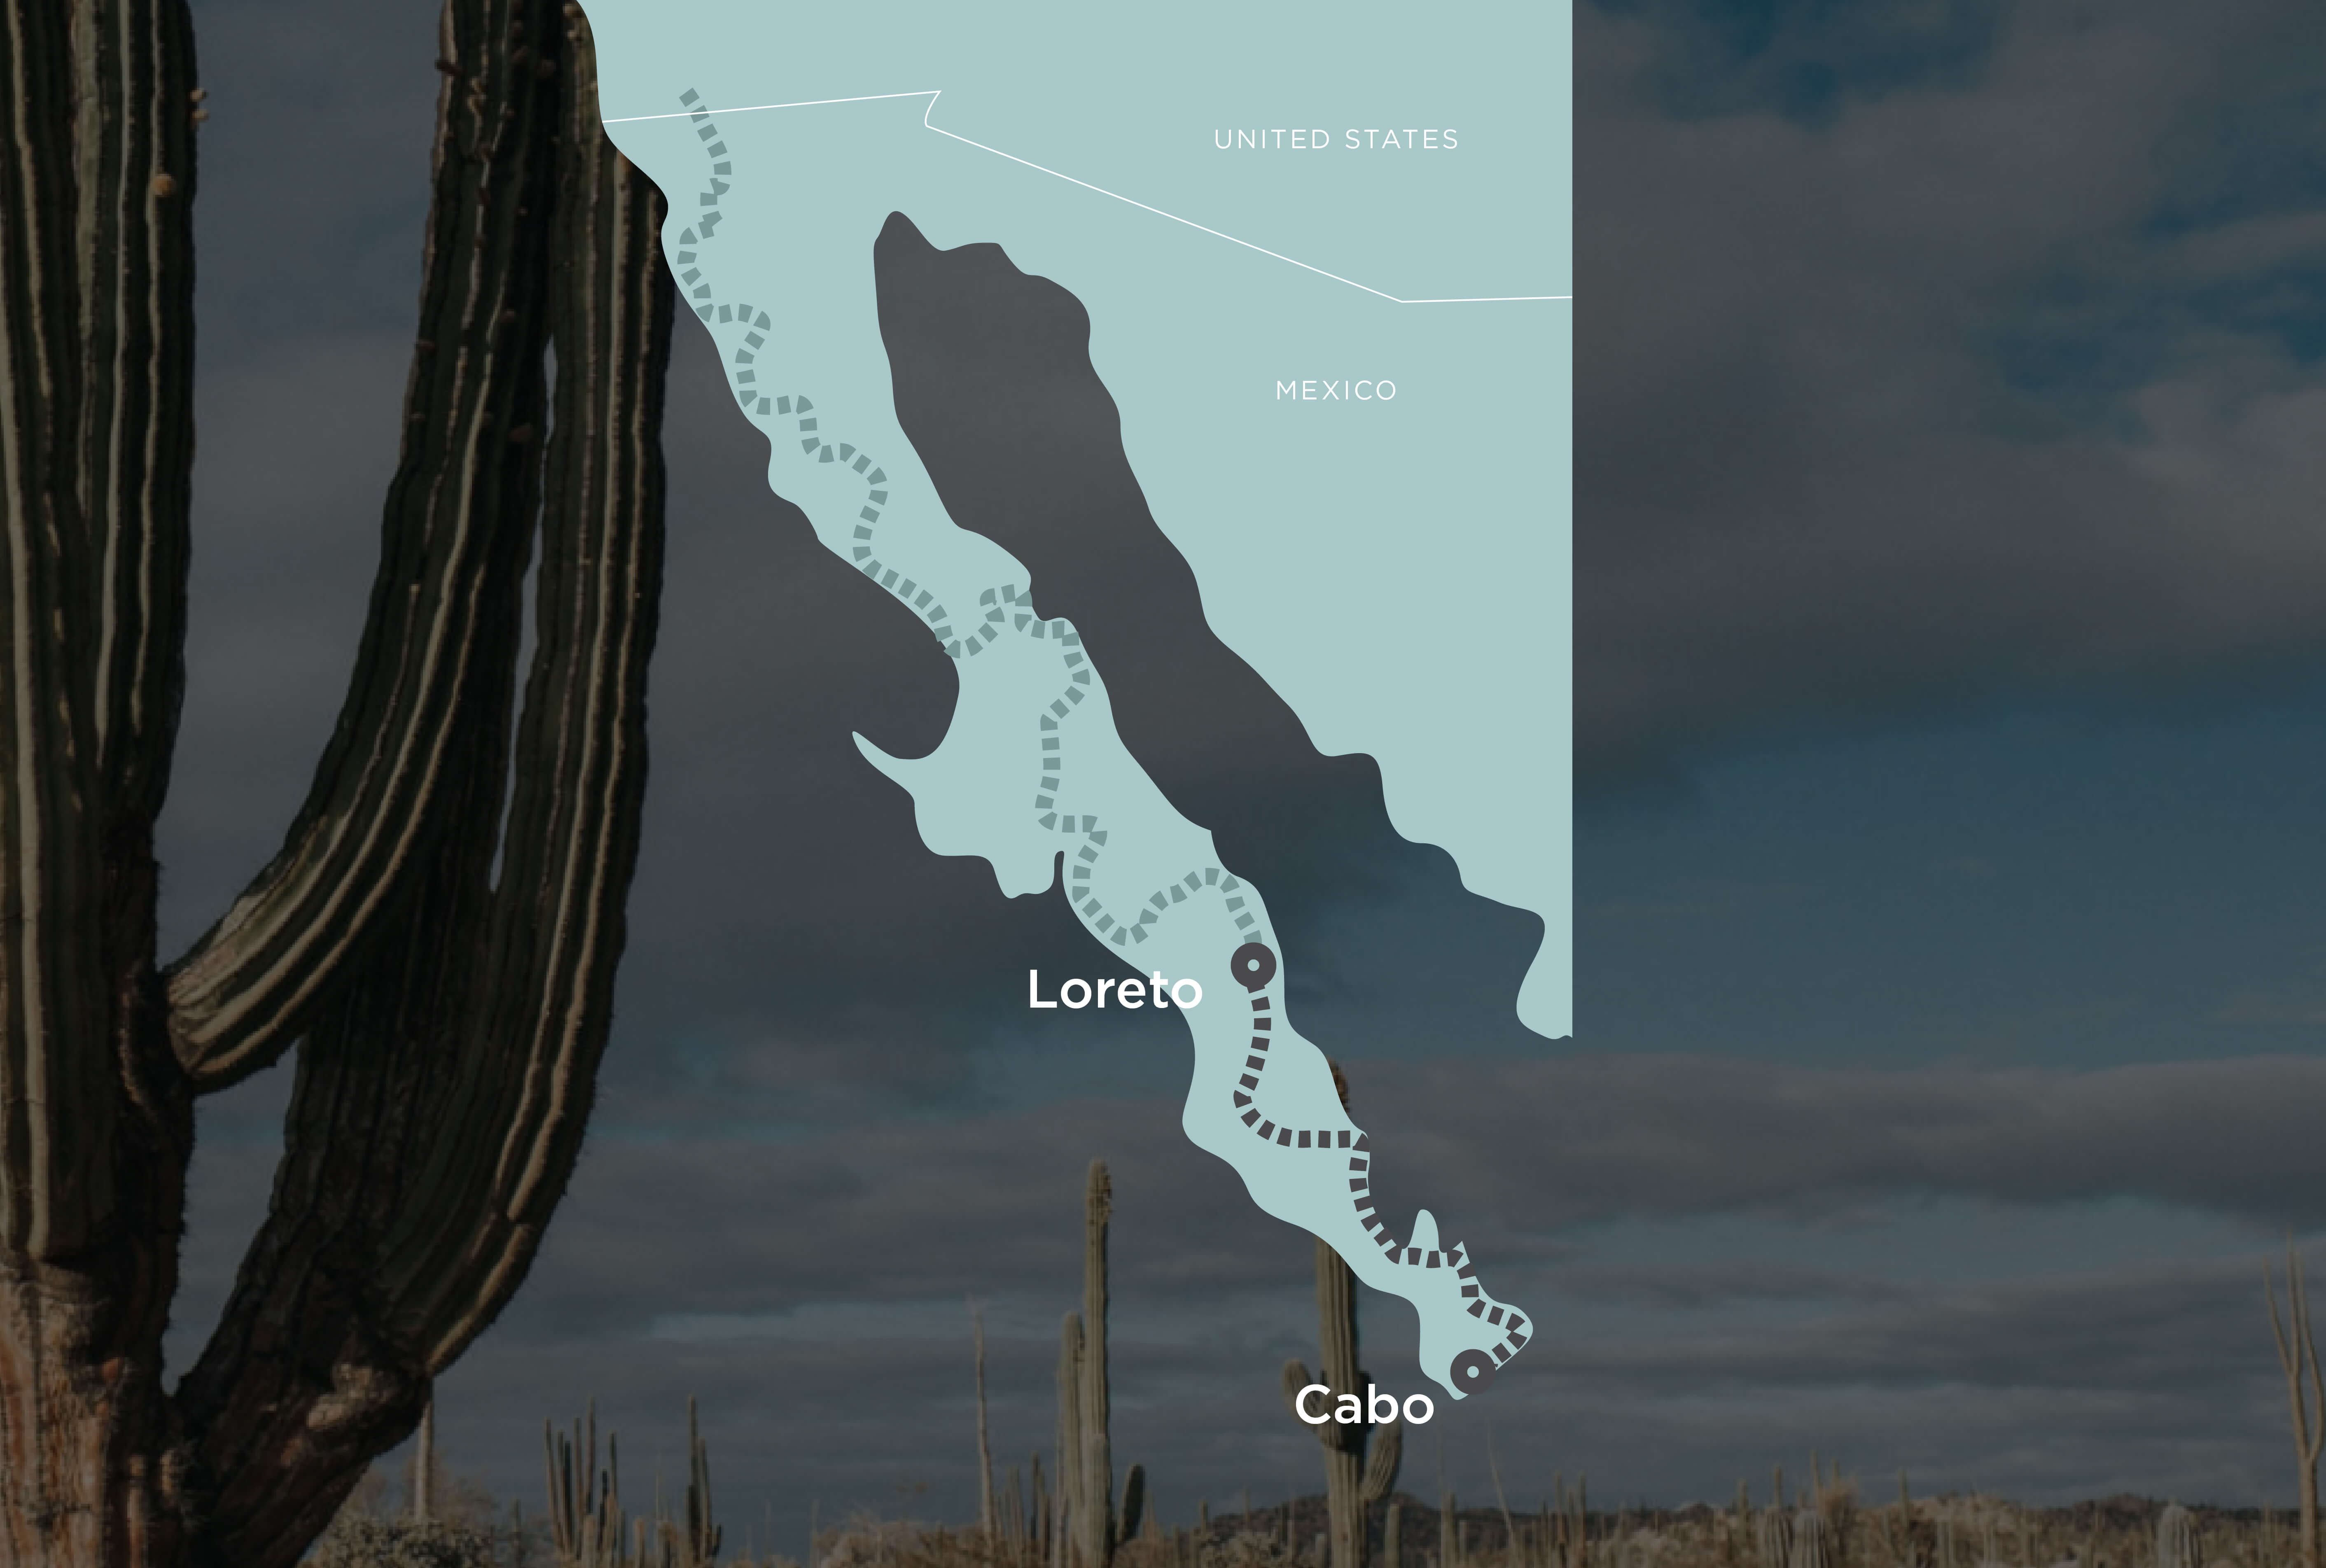 A map of her route from Loreto to Cabo San Lucas in Mexico